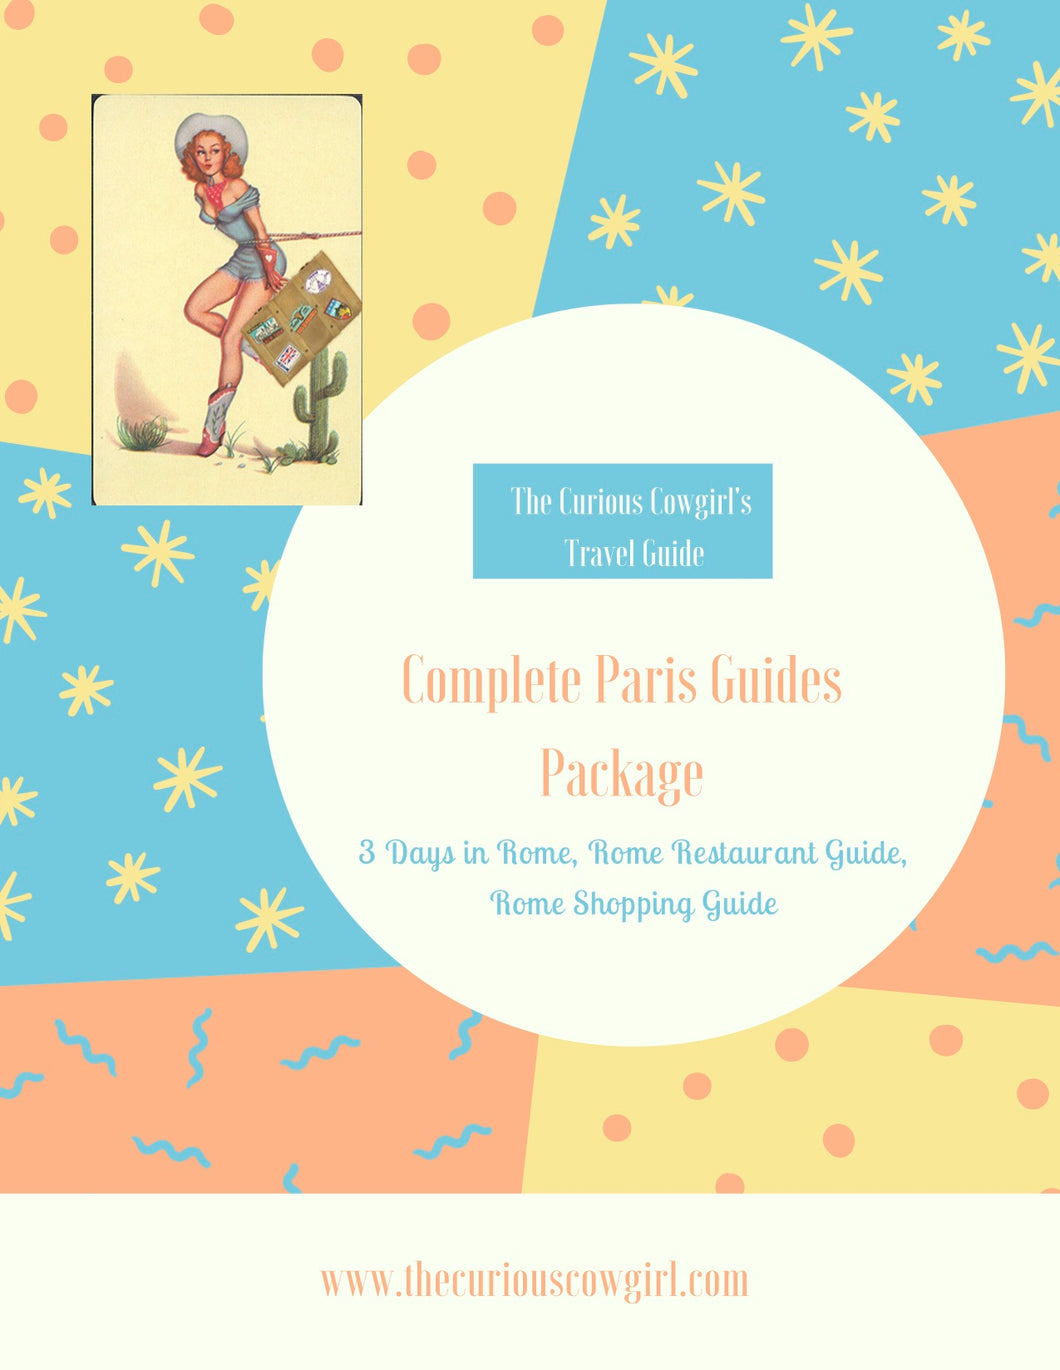 Combined Paris Guides Package